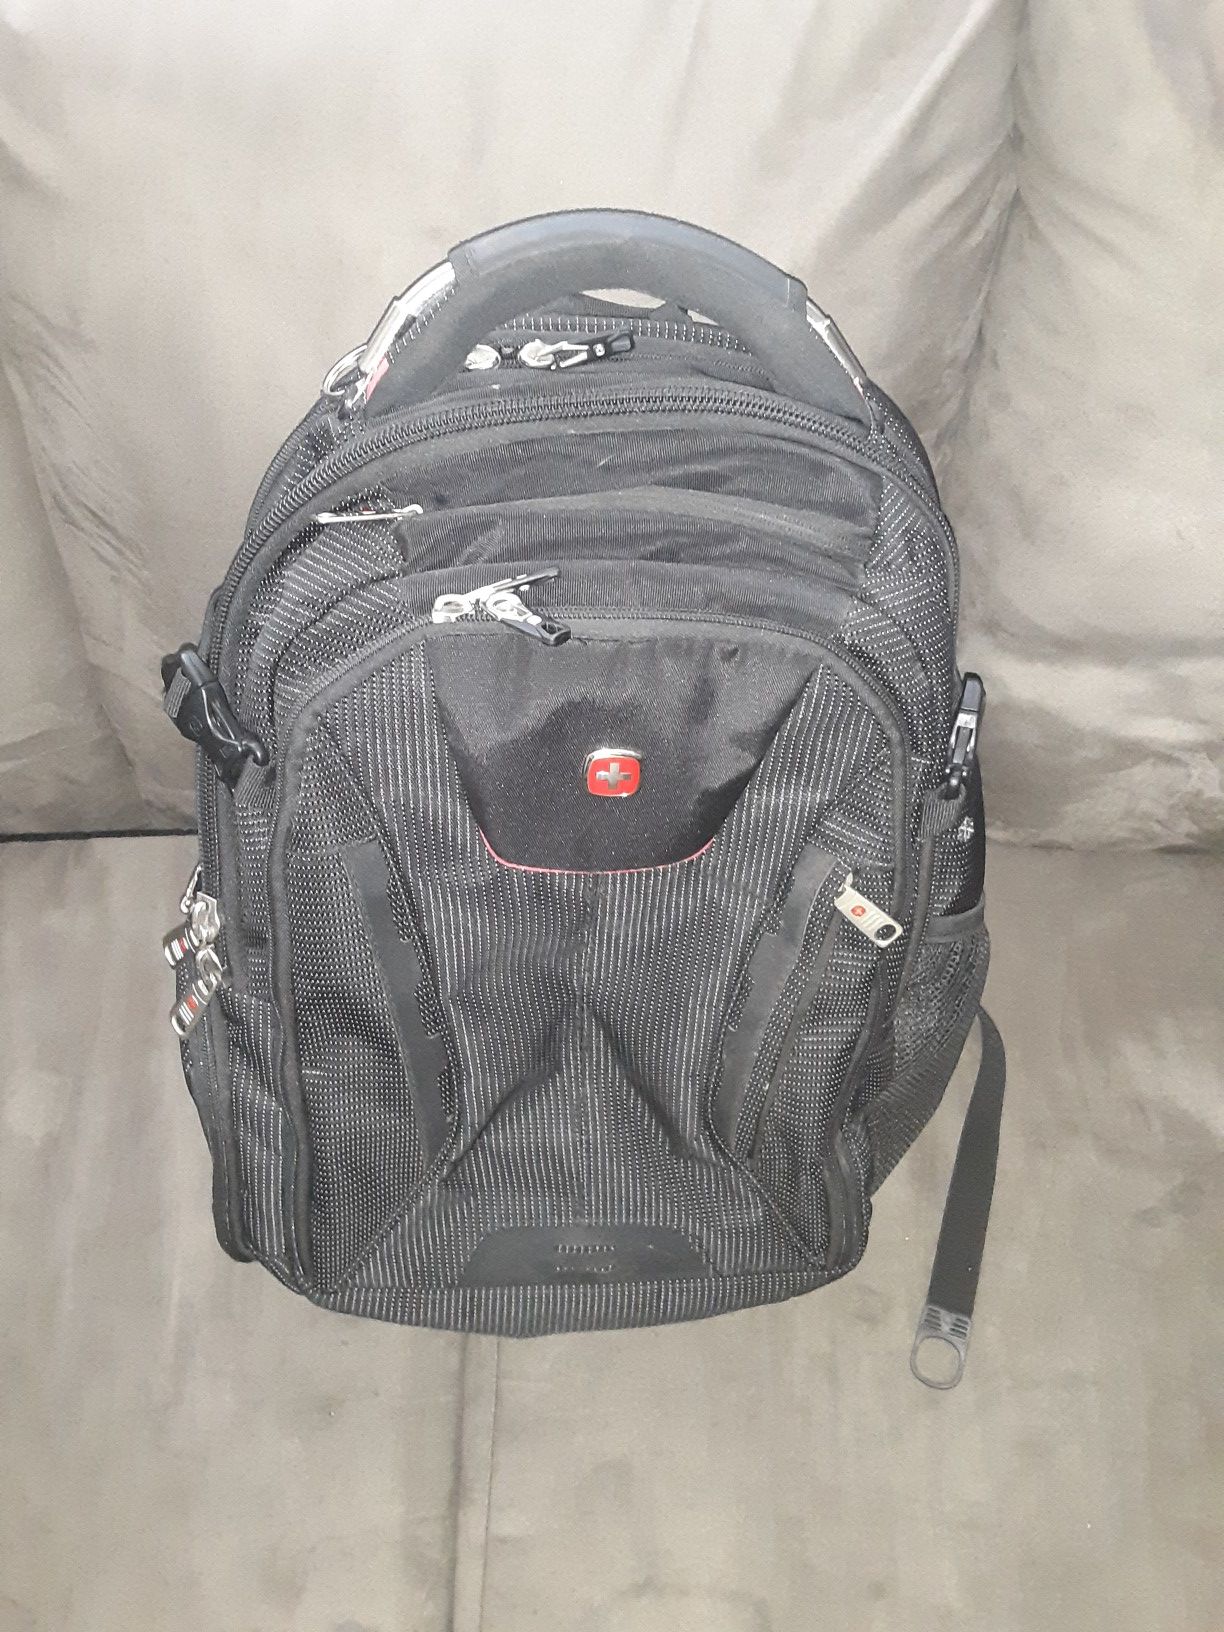 Swiss army laptop backpack